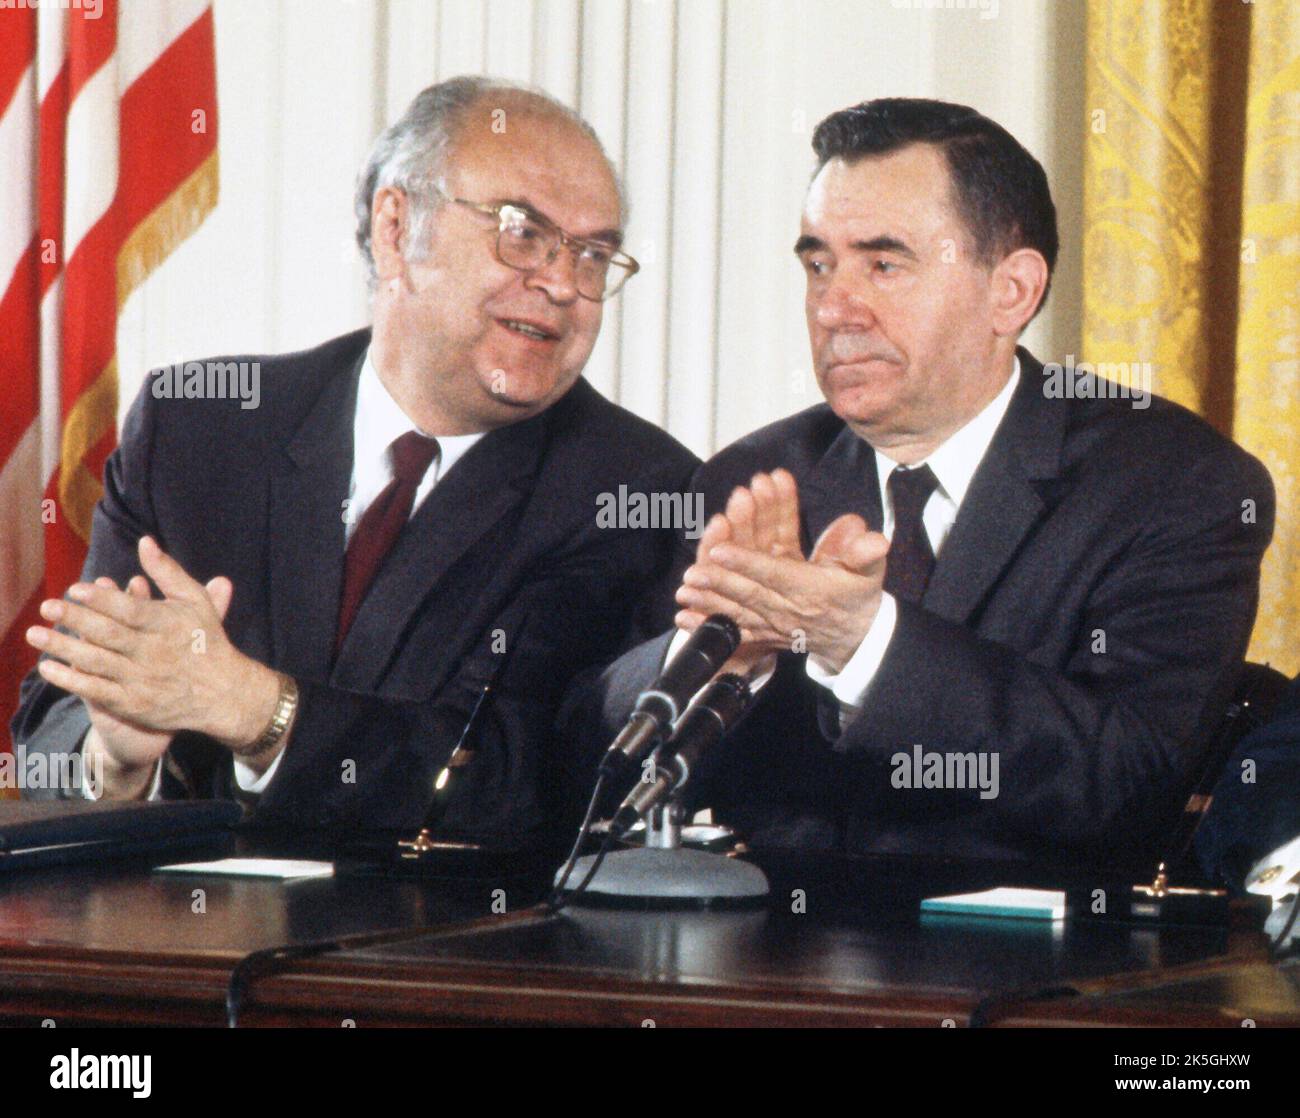 Soviet Ambassador Anatoly F. Dobrynin, left, speaks to Soviet Foreign Minister Andrei Gromyko, right, as United States President Richard M. Nixon makes remarks during a signing ceremony for the instruments of ratification of the SALT agreements between the Union of Soviet Socialist Republics (USSR) and the United States in the East Room of the White House in Washington, DC on October 3, 1972. The agreements intend to restrain the growth of the nuclear arsenals of both nations. Credit: Arnie Sachs / CNP Stock Photo